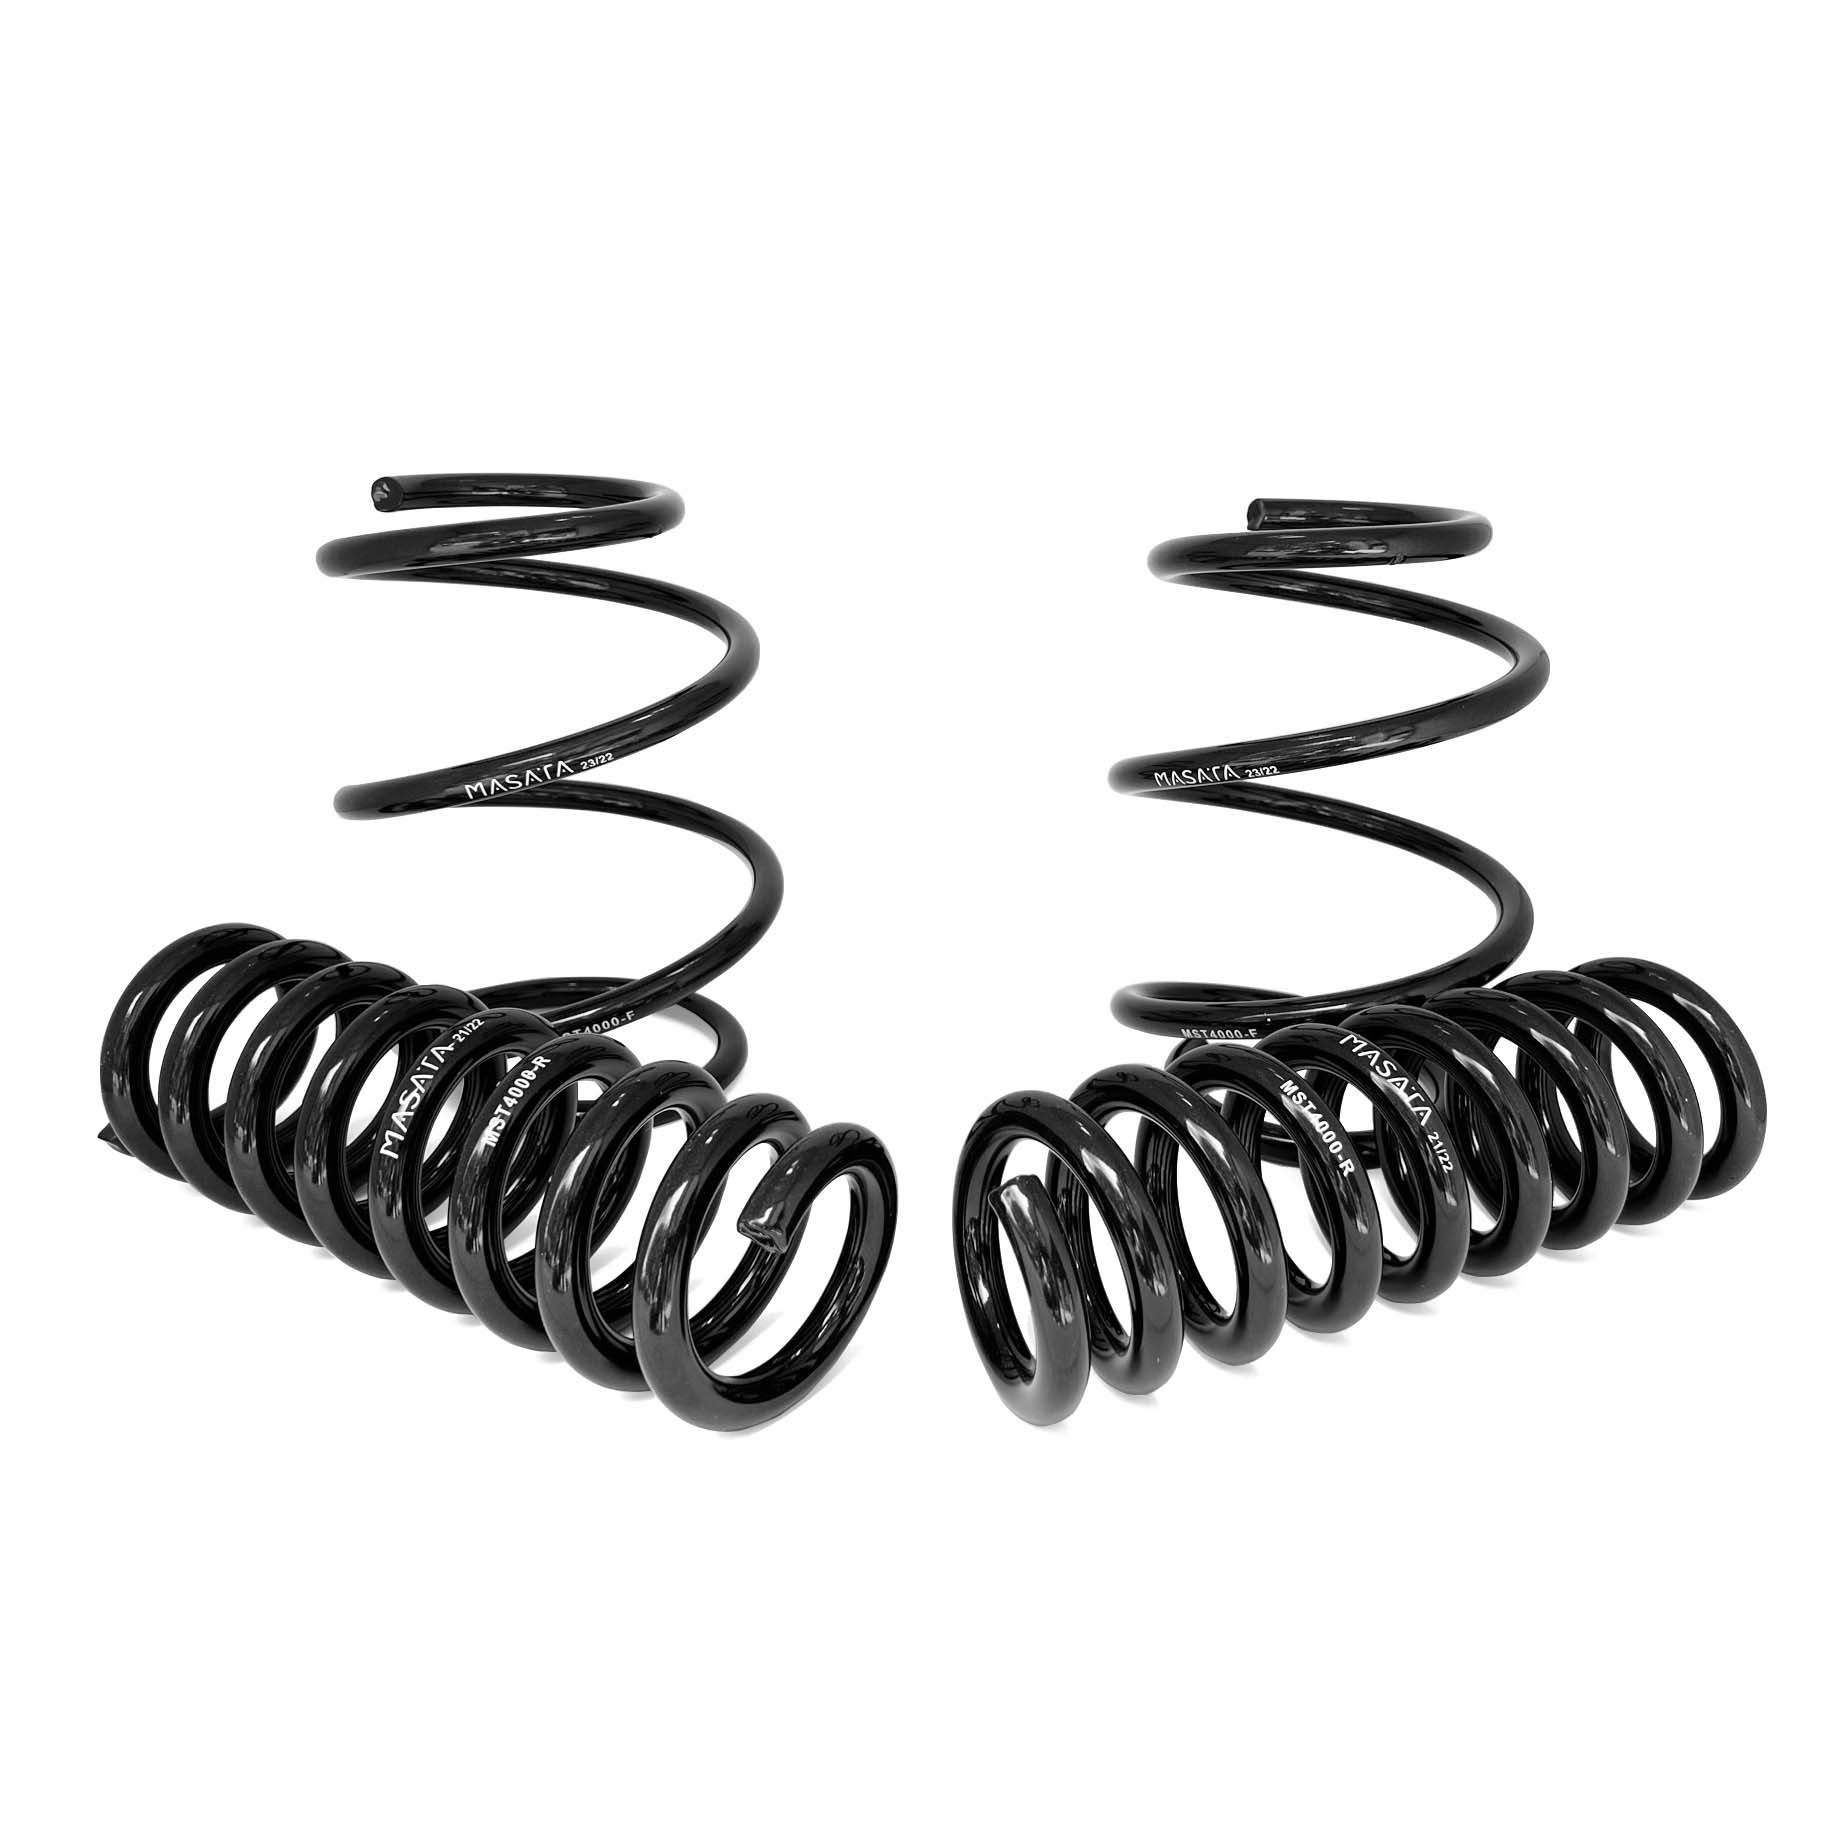 Masata BMW G80 M3/M3 Competition xDrive 35/15mm Performance Lowering Springs